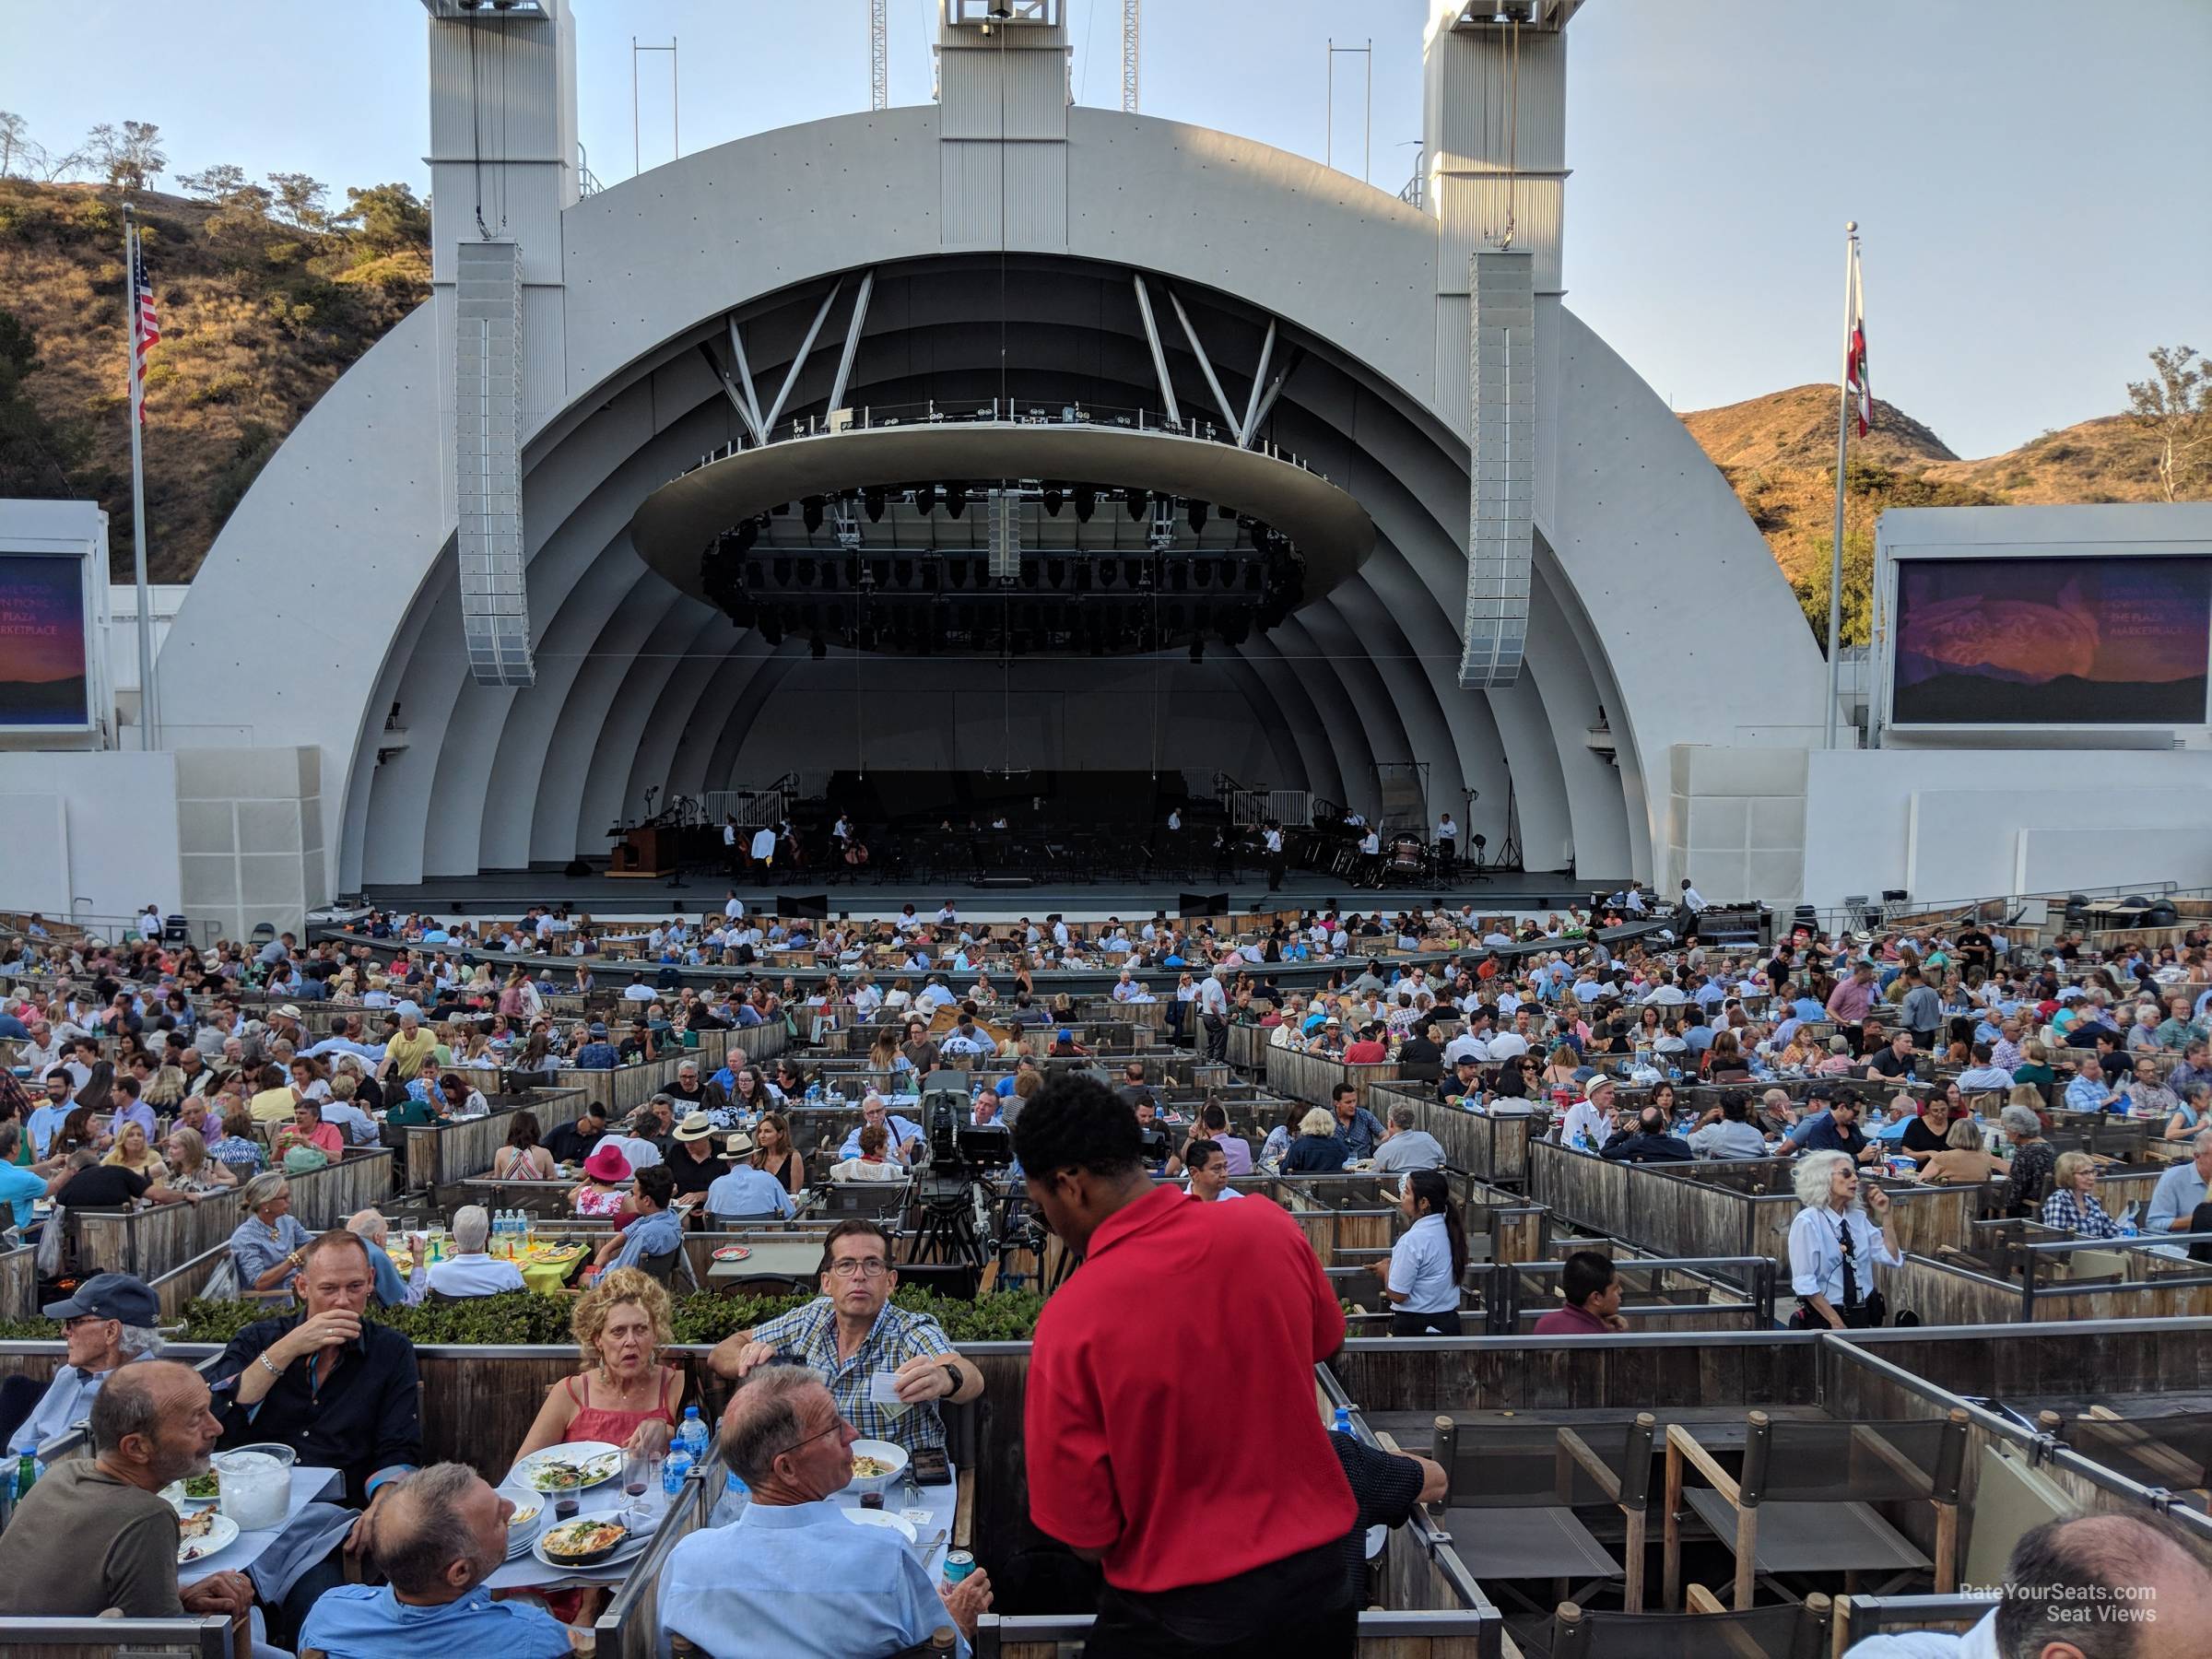 terrace box 4, row 1245 seat view  - hollywood bowl